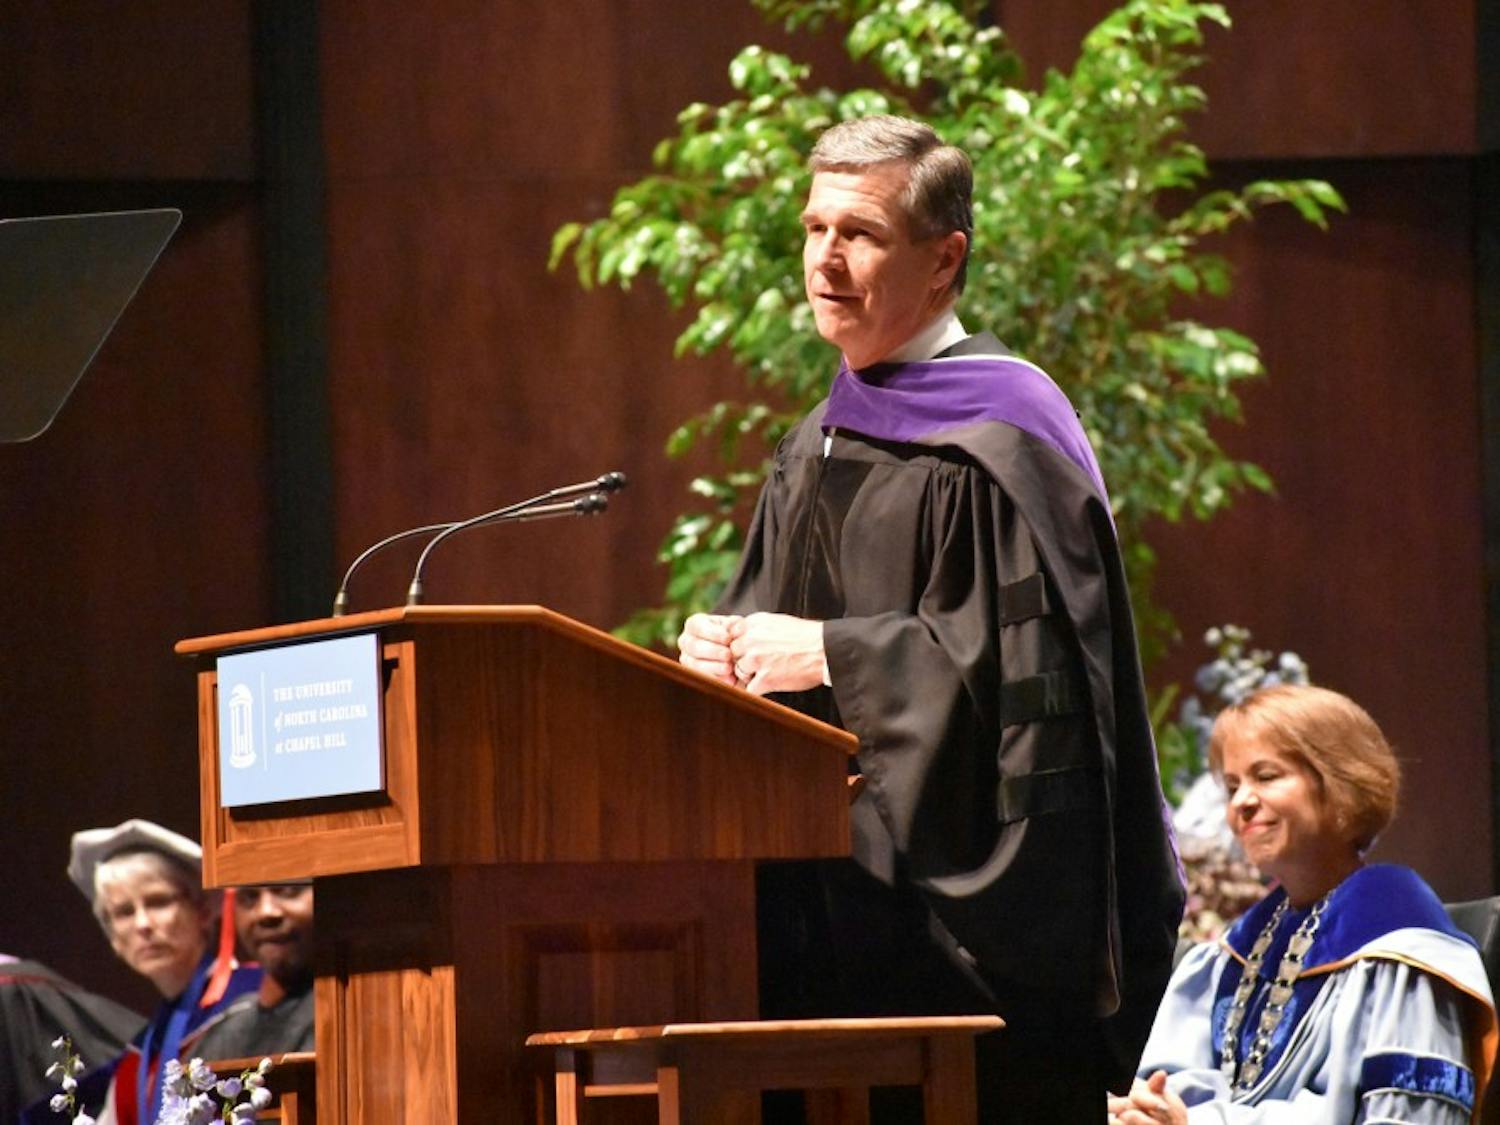 Governor Roy Cooper was the keynote speaker at the University Day ceremony on Oct. 12.